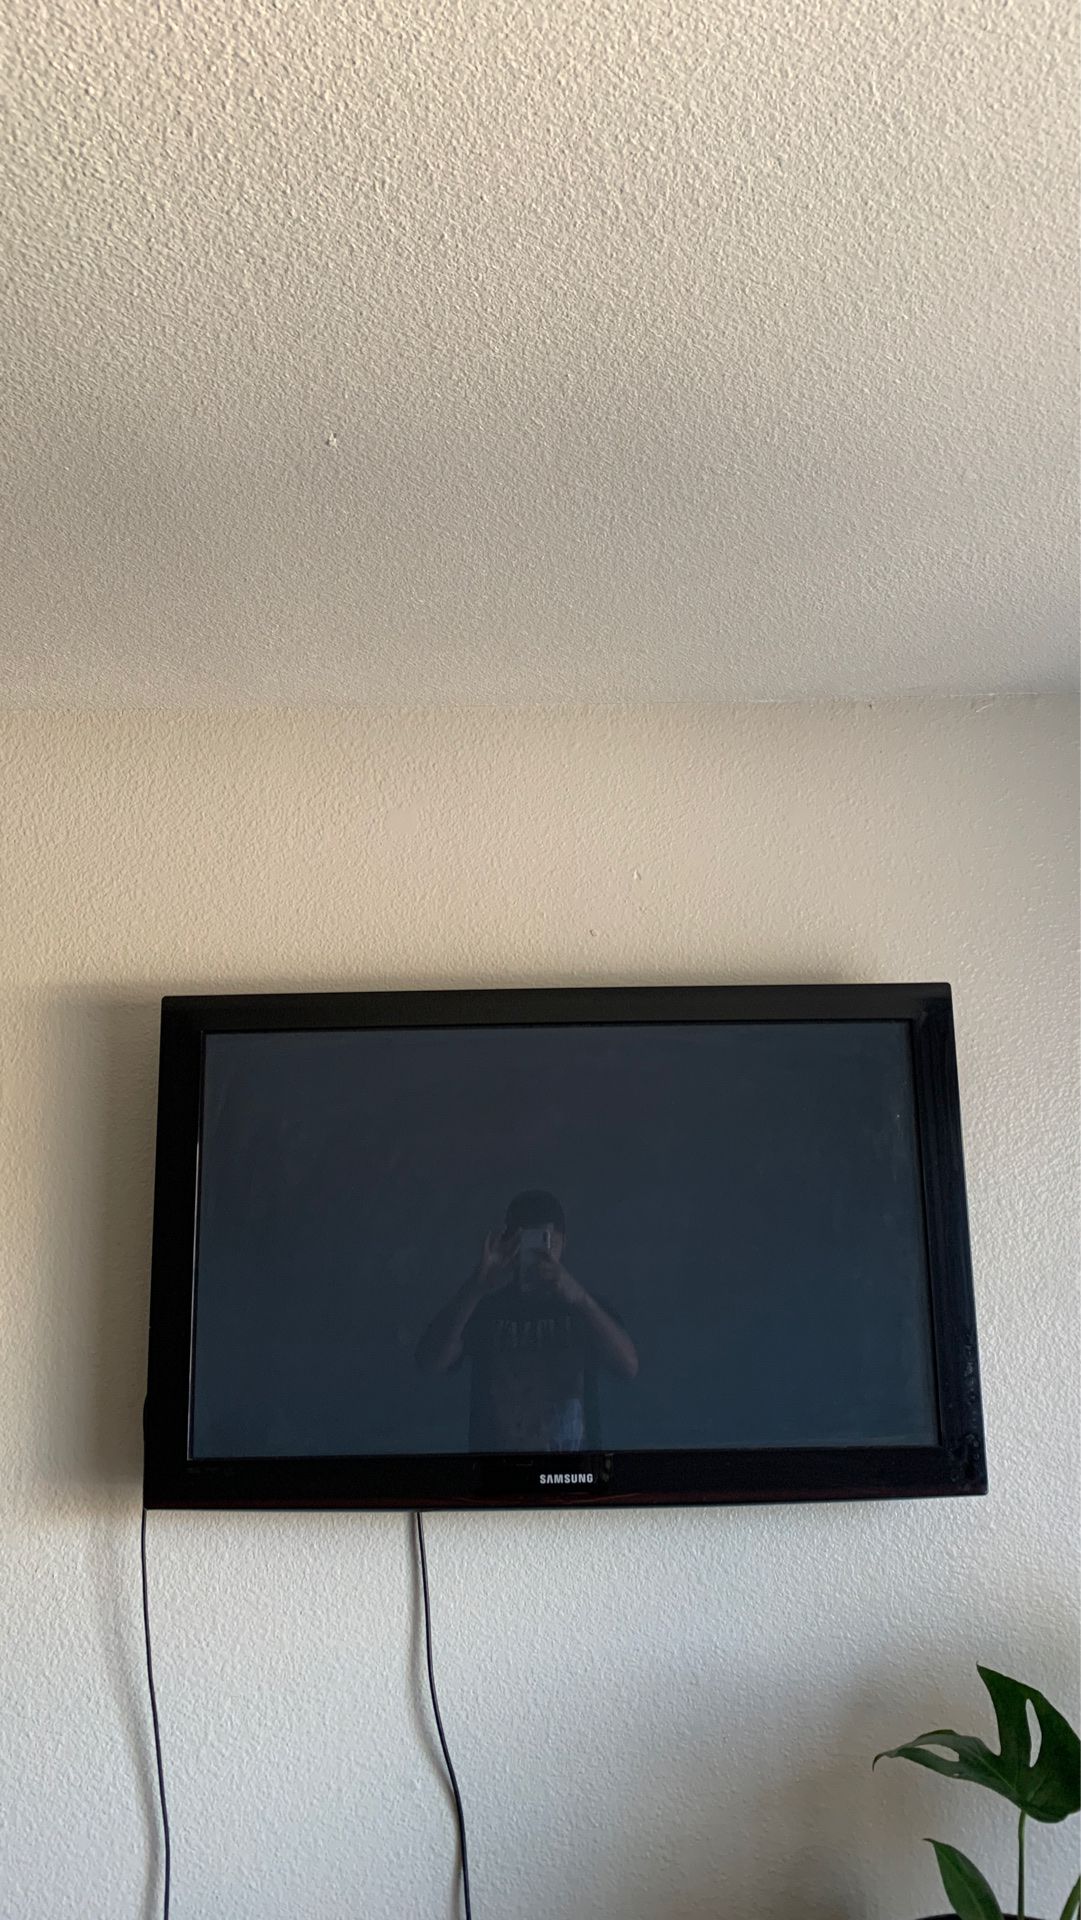 2015 50 INCH SAMSUNG TV. WALL MOUNT INCLUDED